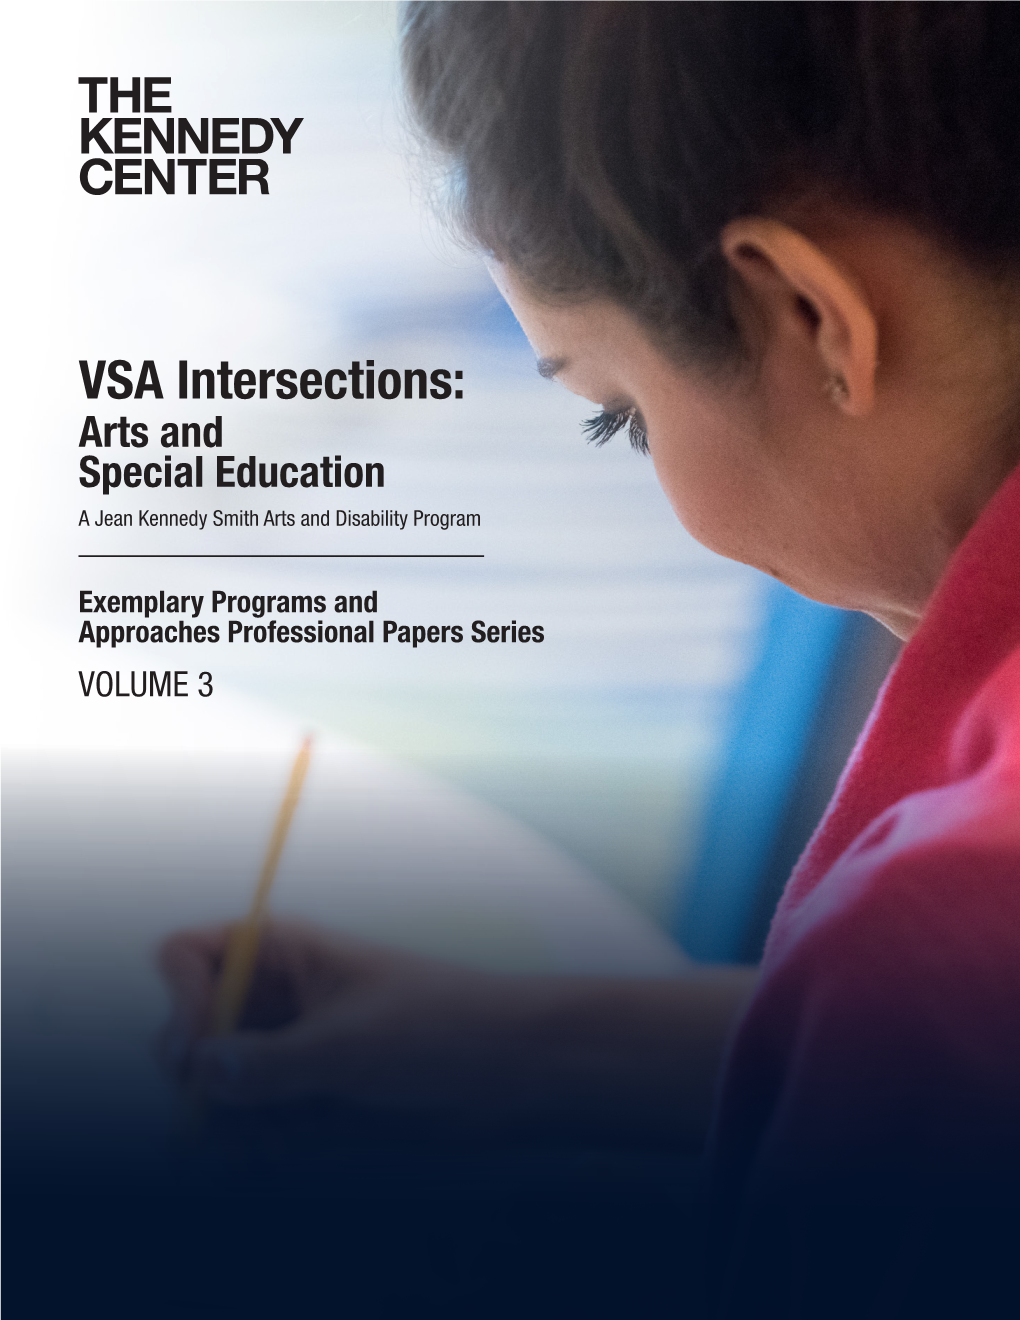 VSA Intersections: Arts and Special Education a Jean Kennedy Smith Arts and Disability Program